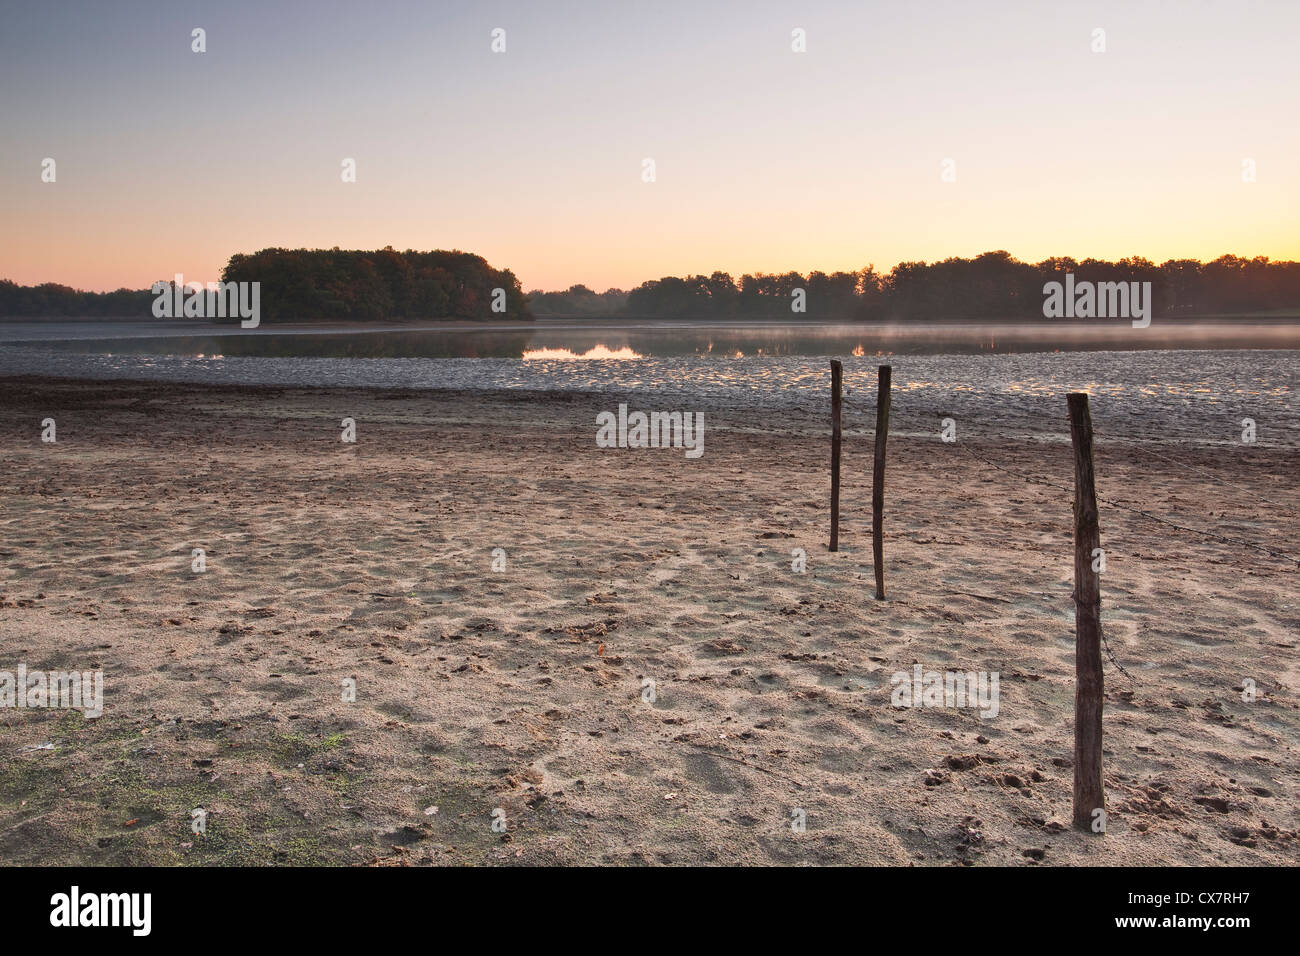 A lake at dawn in La Brenne area of central France. Stock Photo